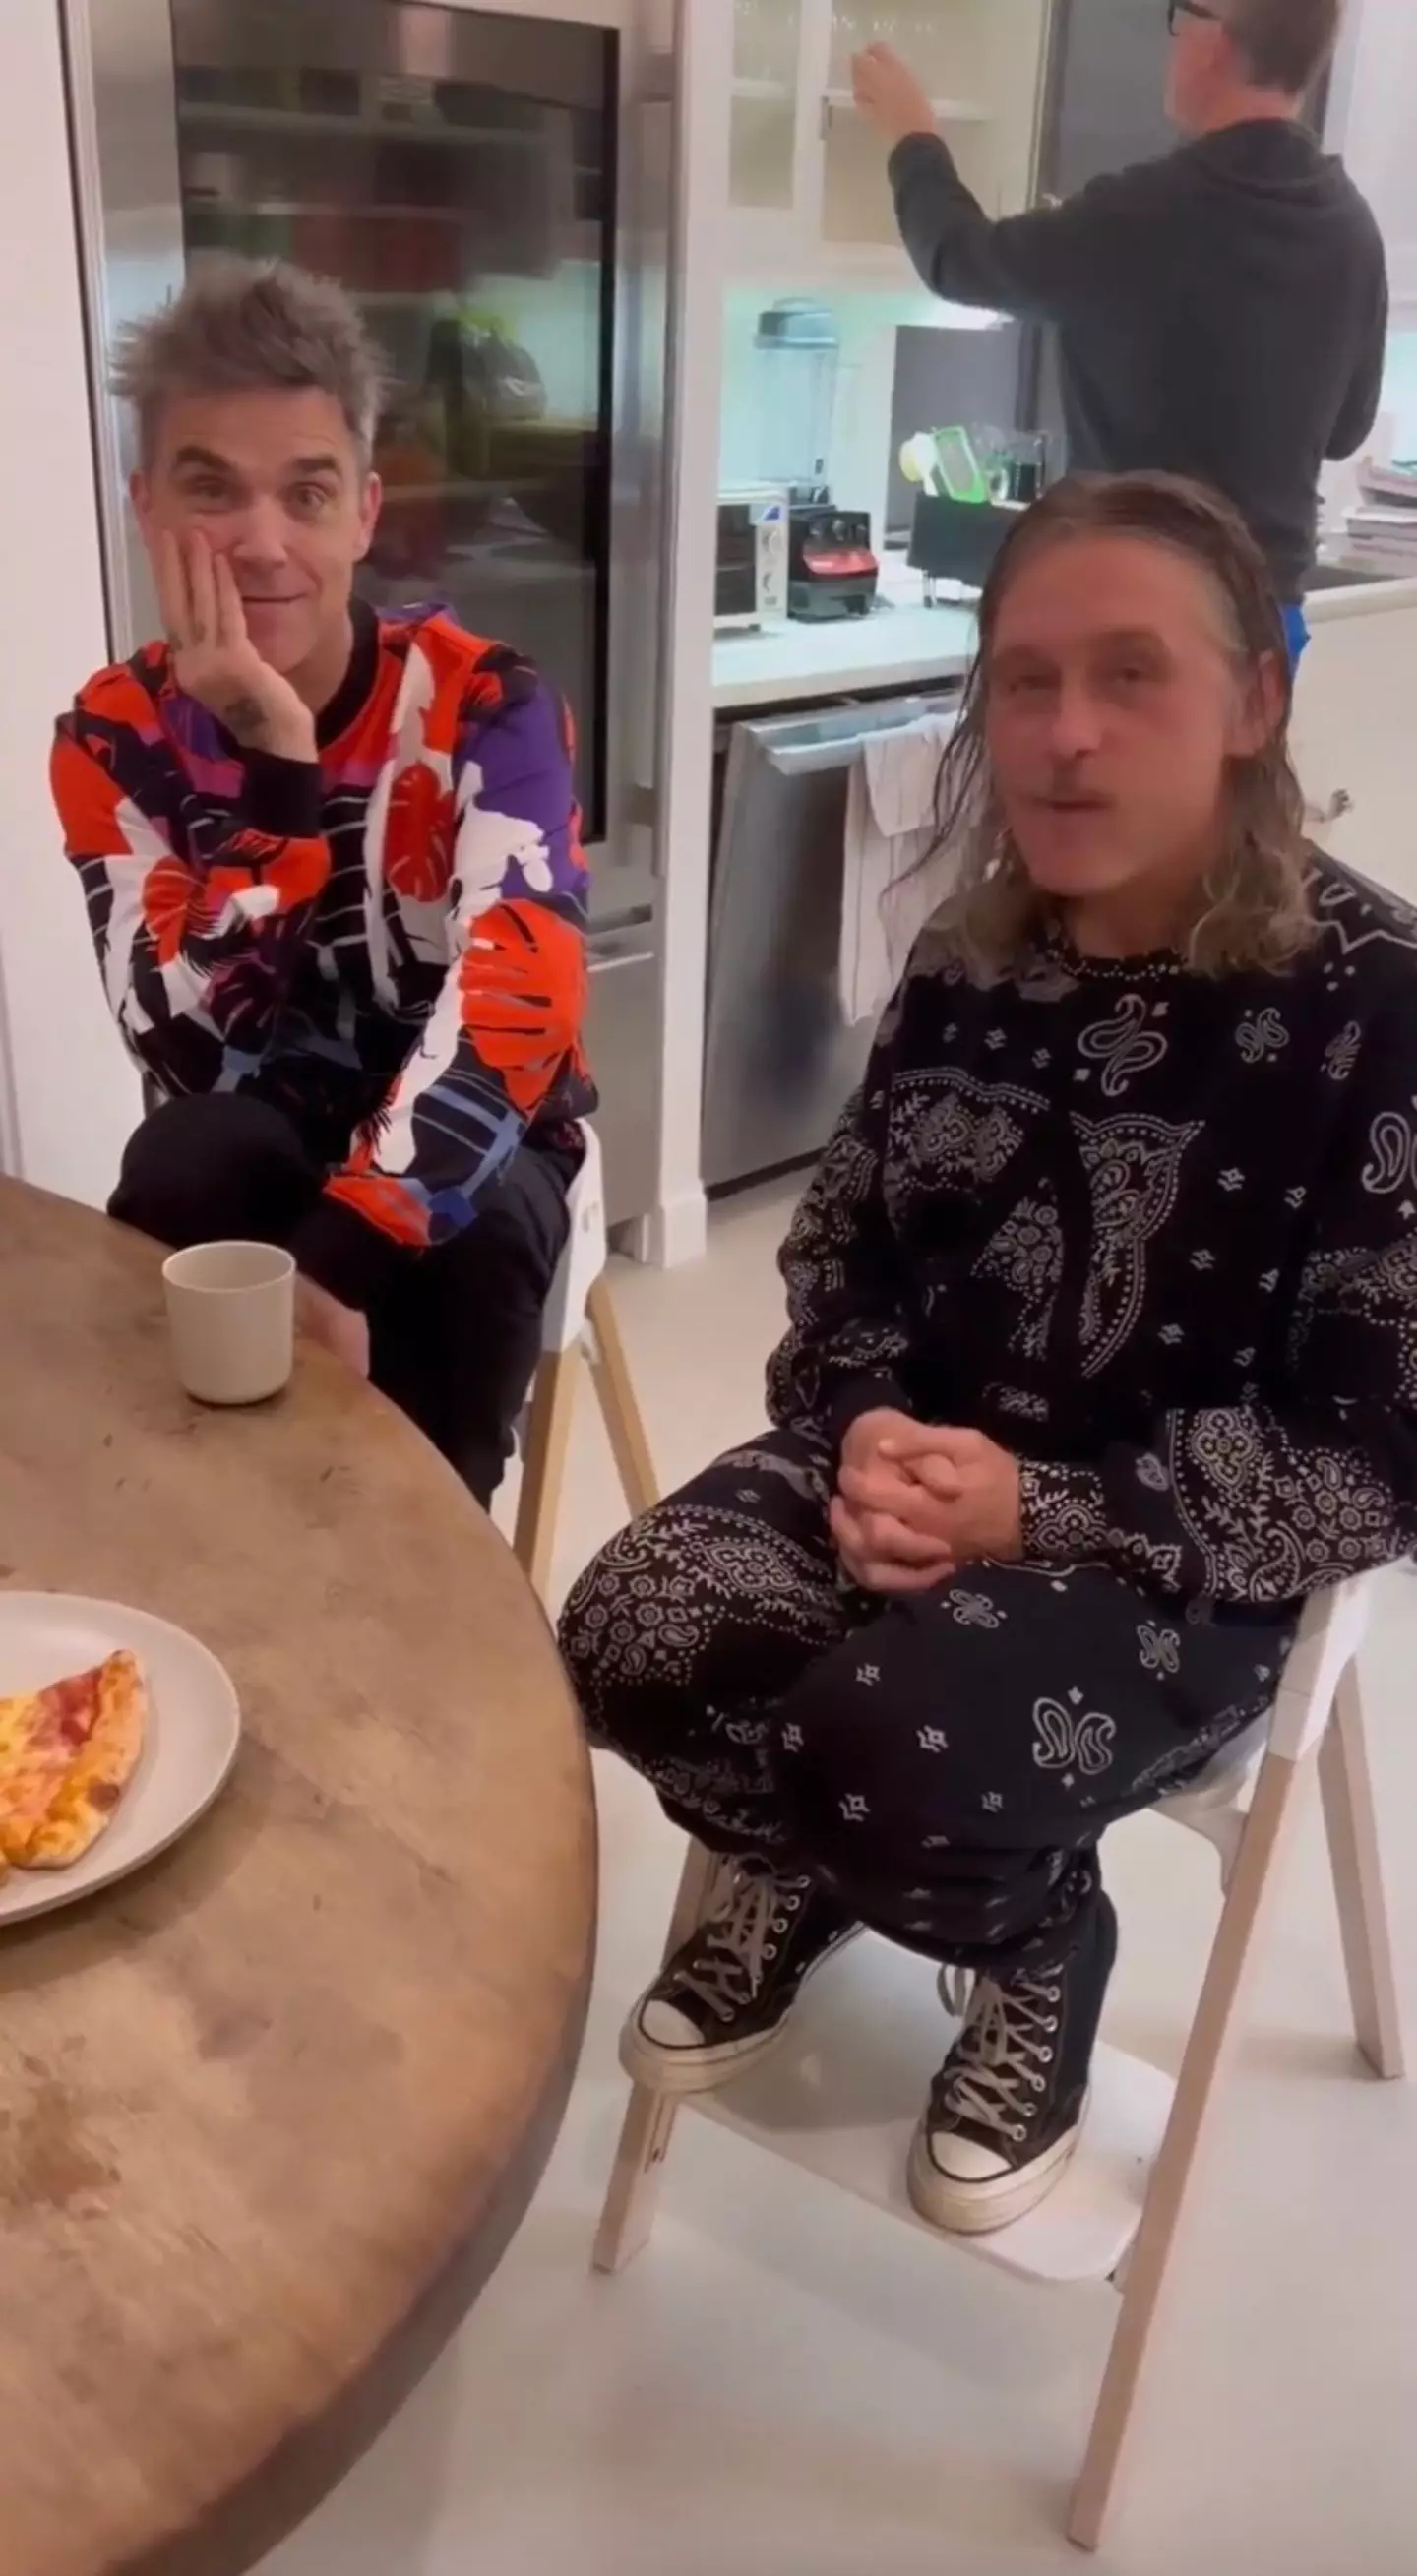 Robbie, 48, and Mark, 50, are both randomly tucking into a slice of pizza while sat in 'baby' high chairs.